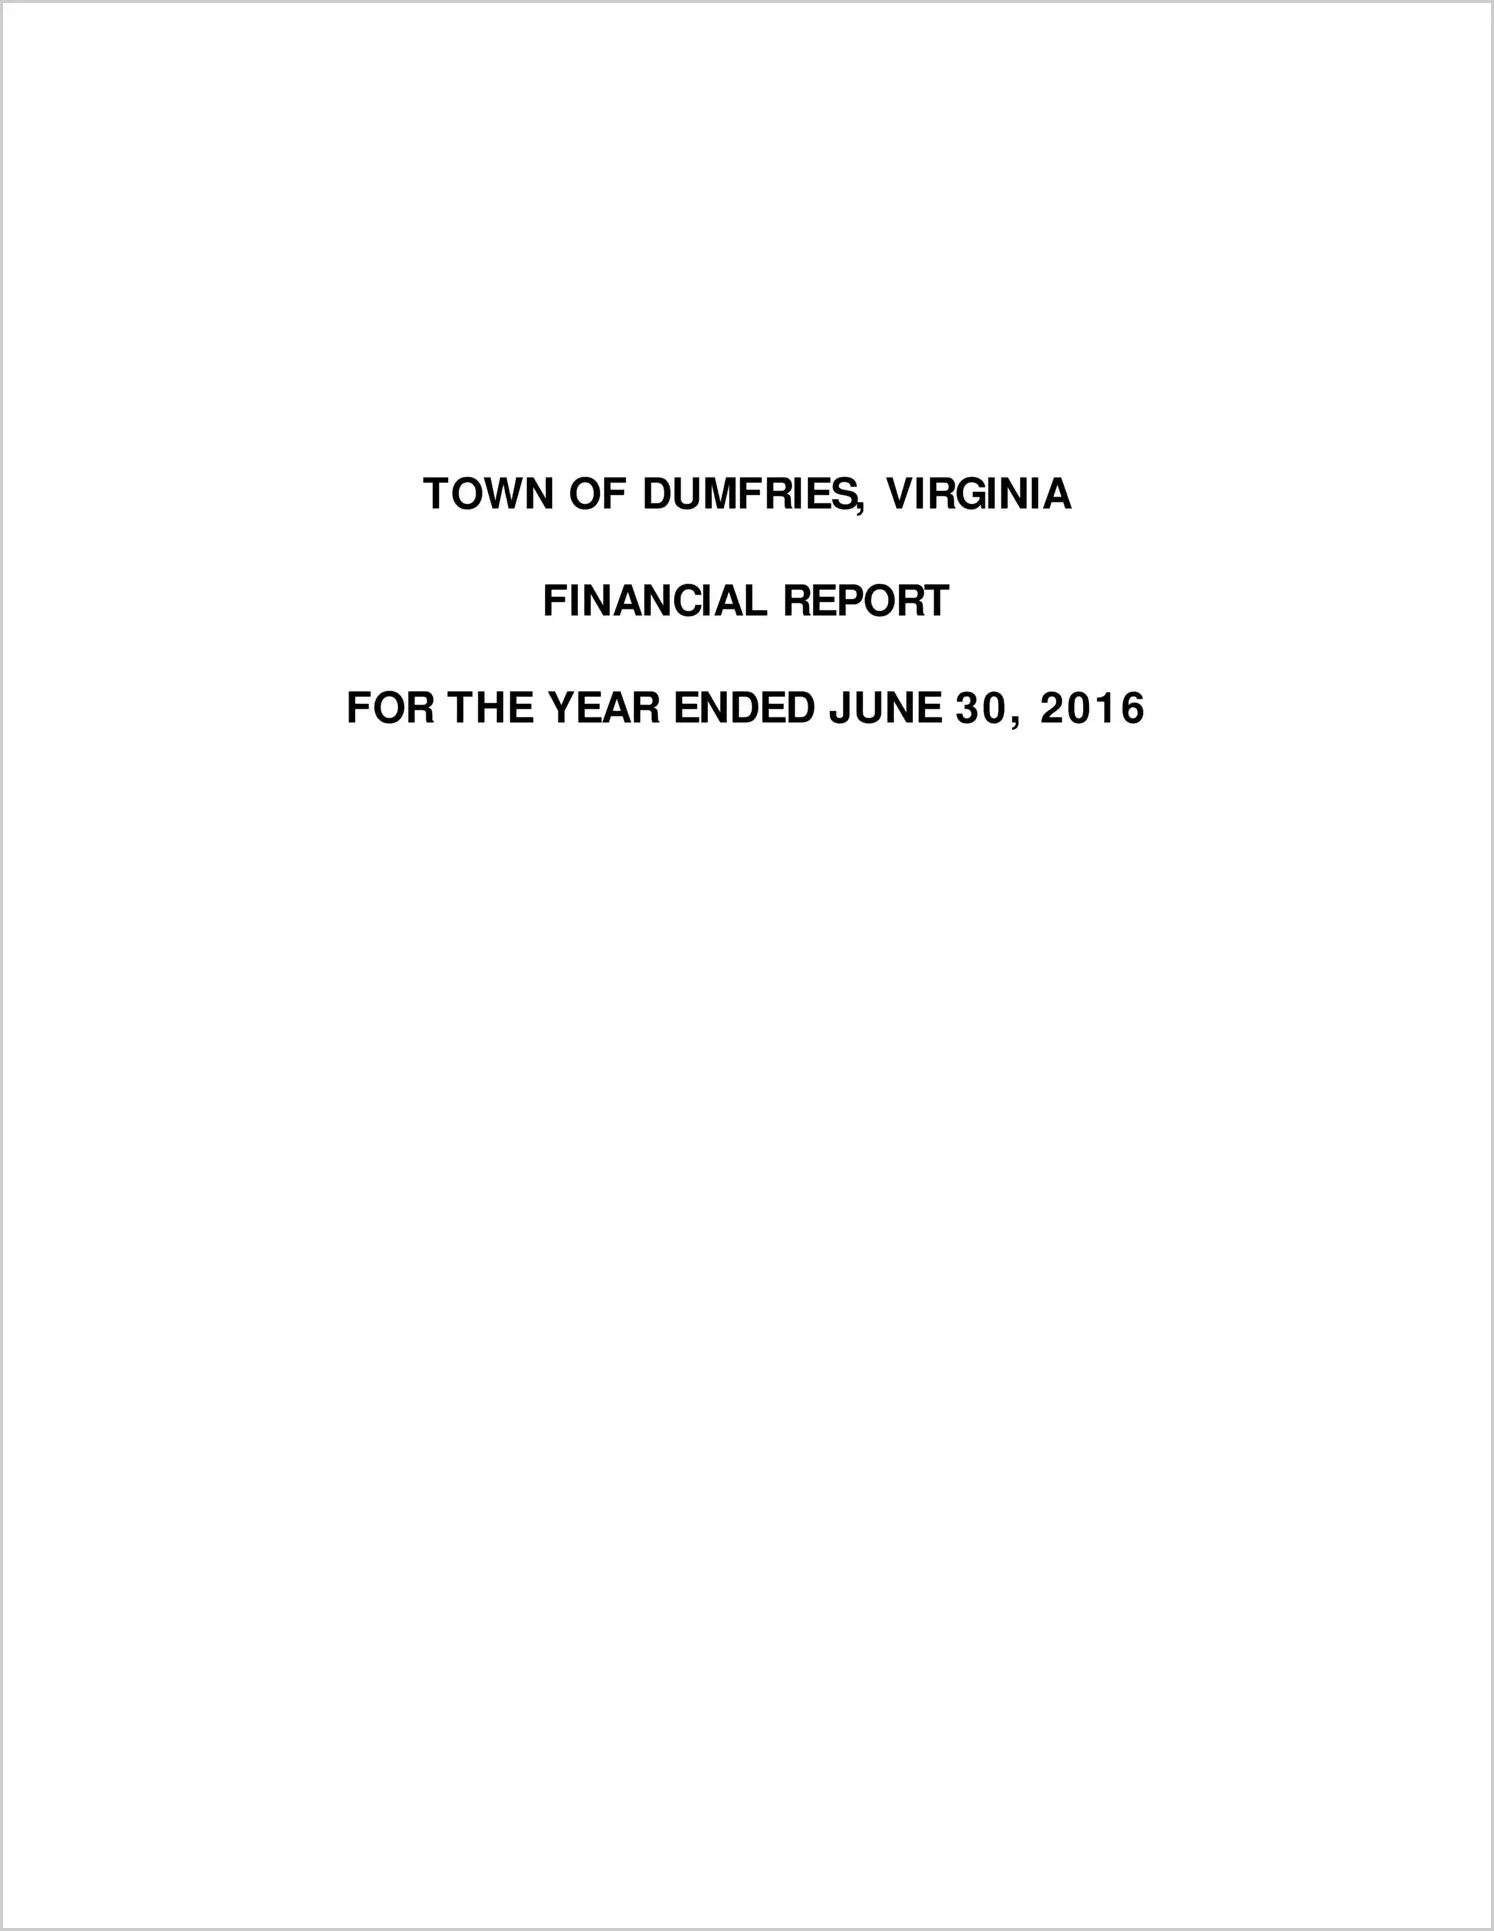 2016 Annual Financial Report for Town of Dumfries